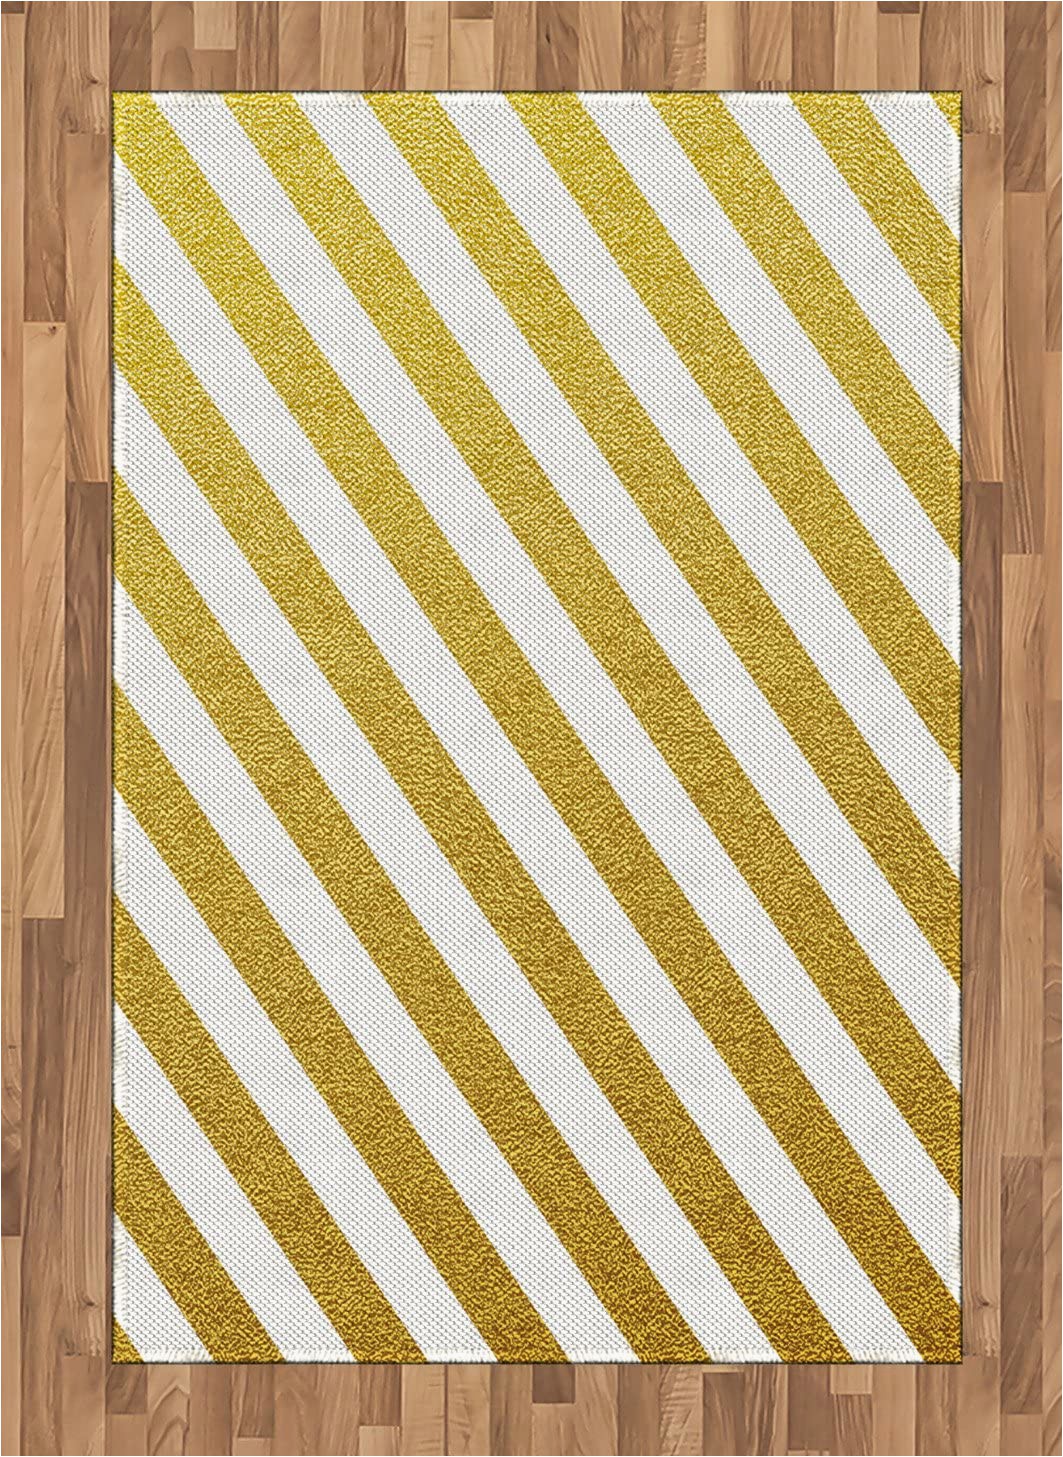 Yellow and White Striped area Rug Amazon Lunarable Striped area Rug Diagonal Bold Lines